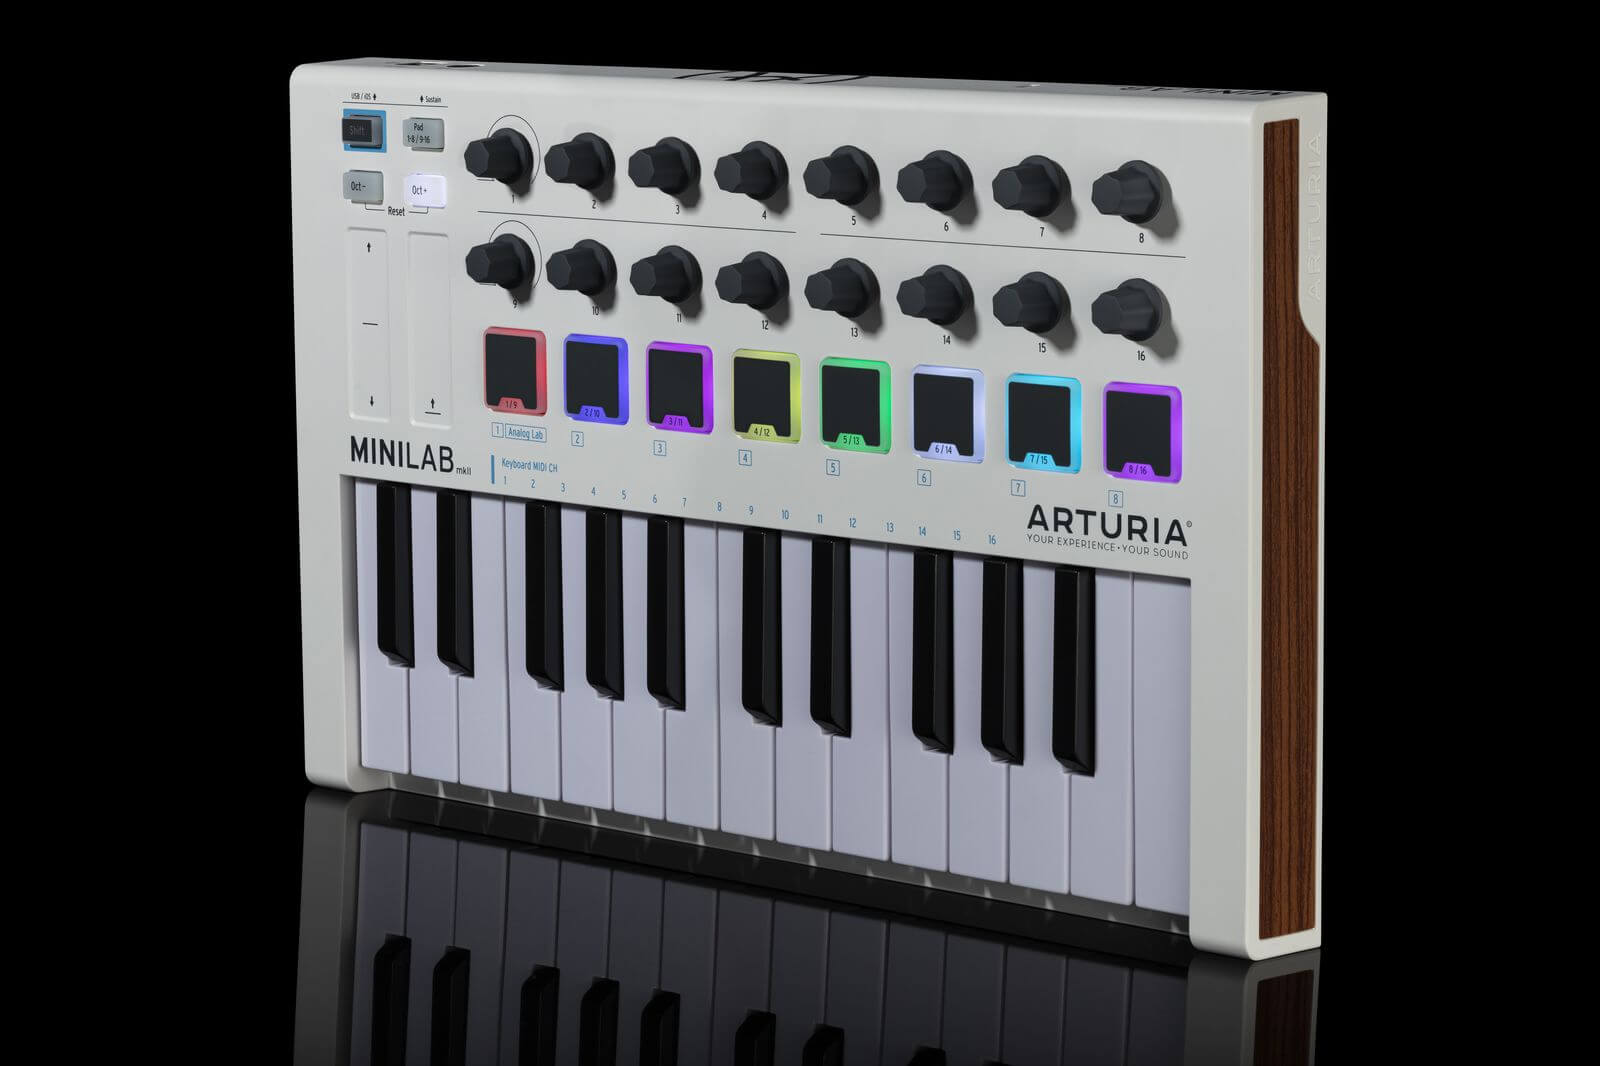 The affordable Minilab MIDI keyboard also has pitch and mod touch strips rather than wheels, much like previous options on our list of affordable controllers.